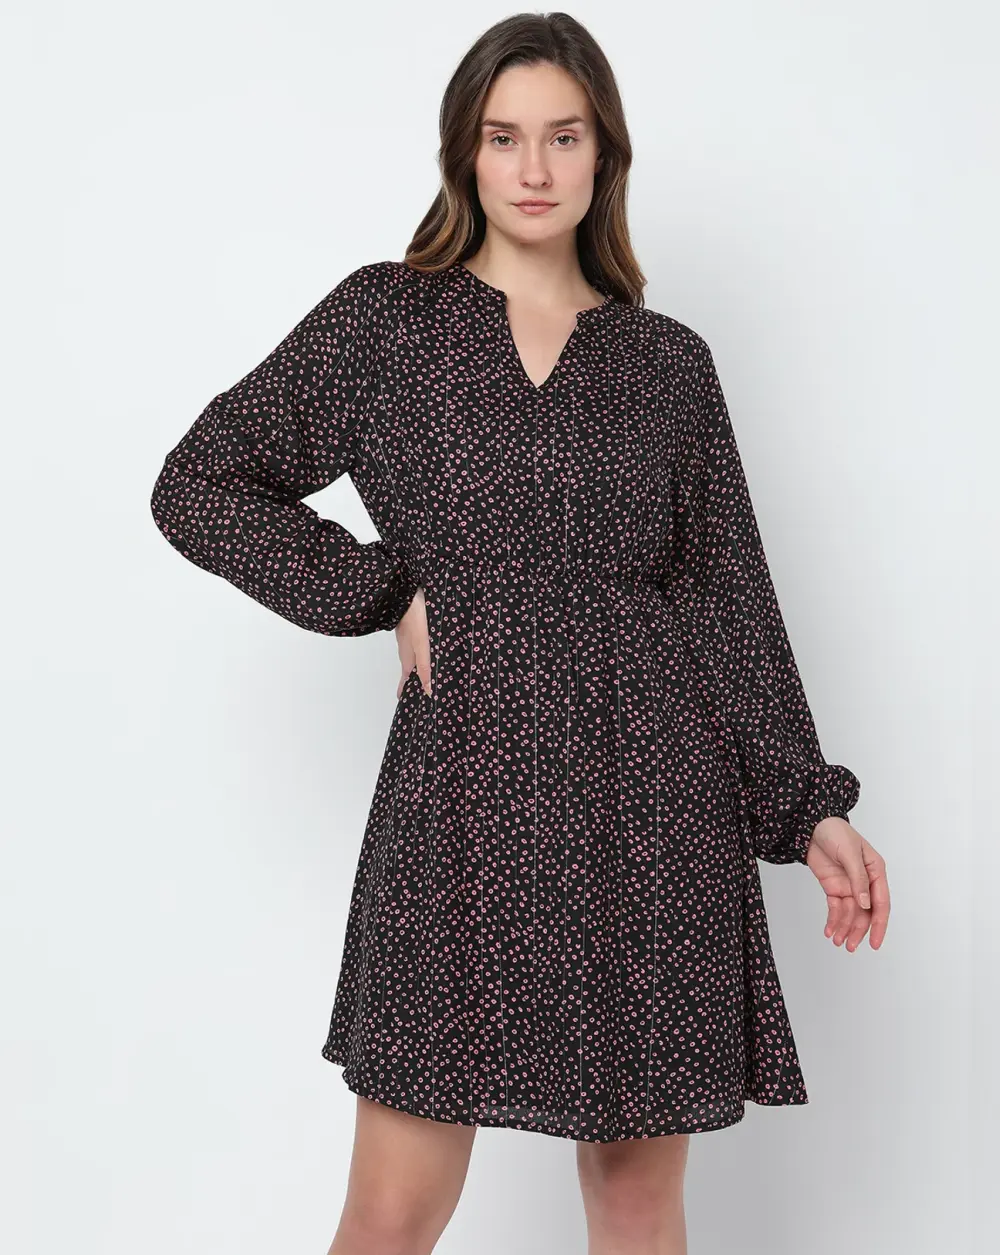 BLACK DITSY PRINTED FIT & FLARE DRESS